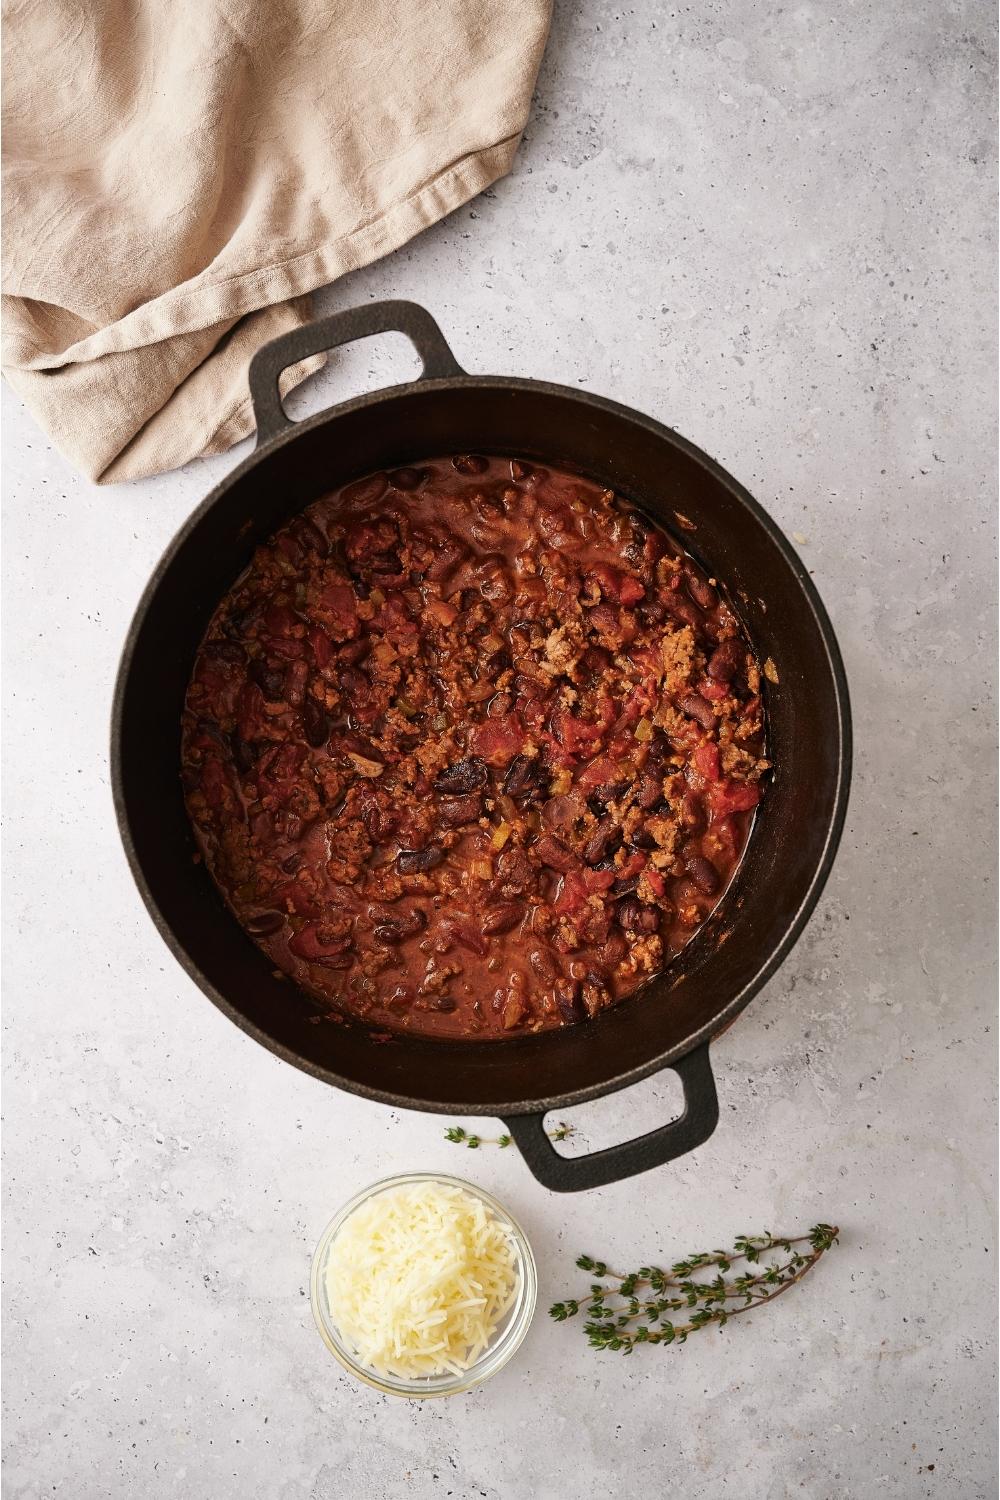 A large pot of chili on a grey counter that is surrounded by a white kitchen towel, a small bowl of cheese, and sprigs of dried thyme.